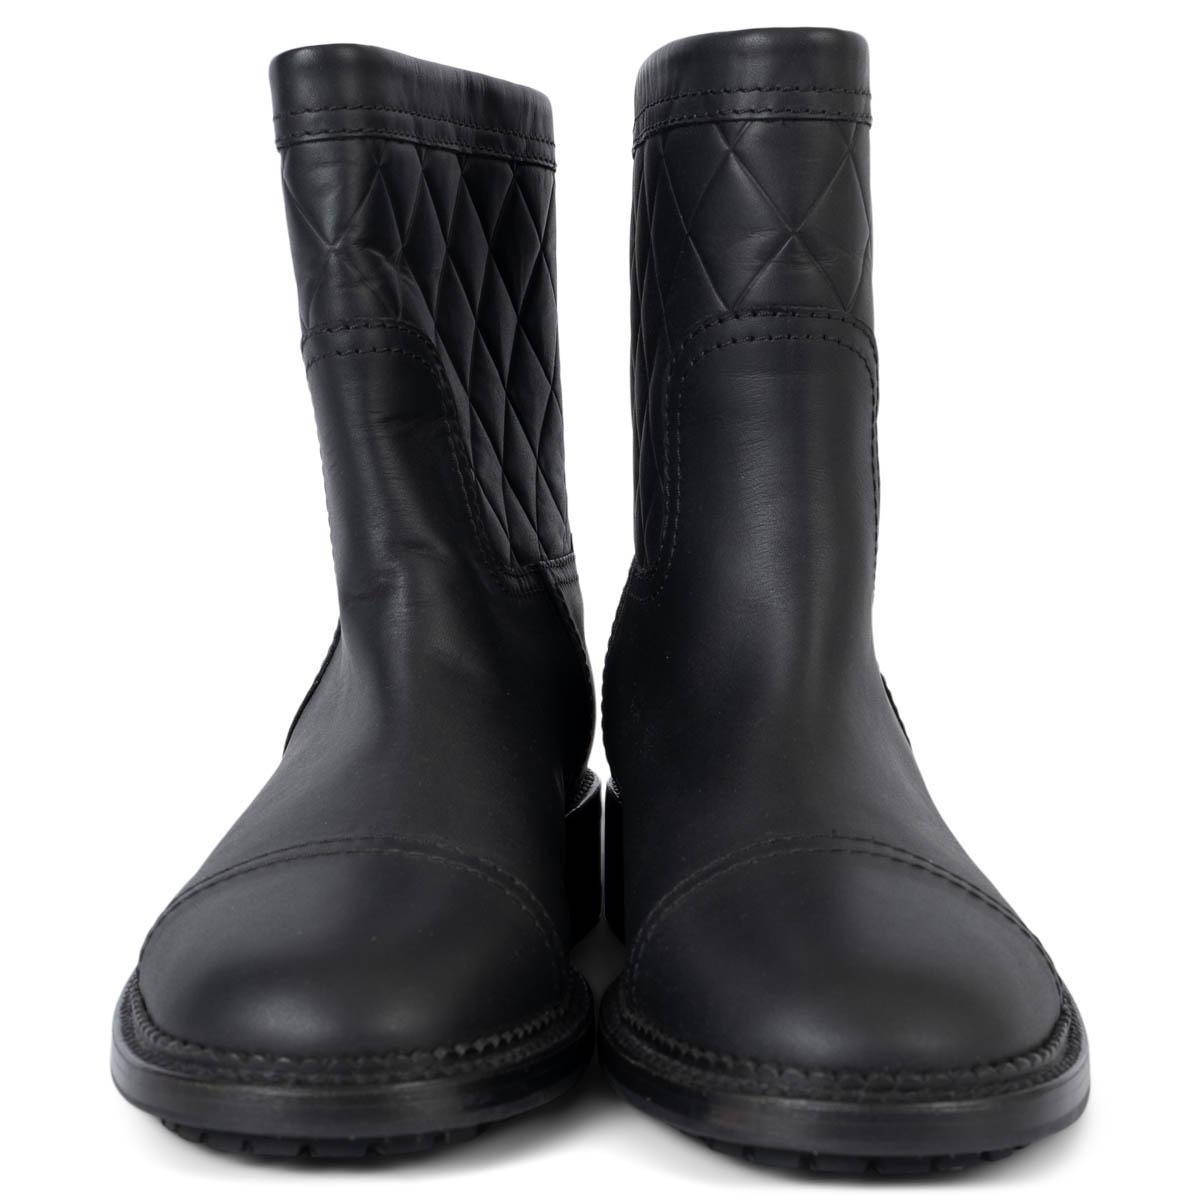 100% authentic Chanel biker boots in black mat calfskin featuring quilted shaft with CC logo embossing. Open with a zipper on the heel and come with a black rubber sole. Brand new. 

2014 Fall/Winter

Measurements
Model	14K G29322
Imprinted